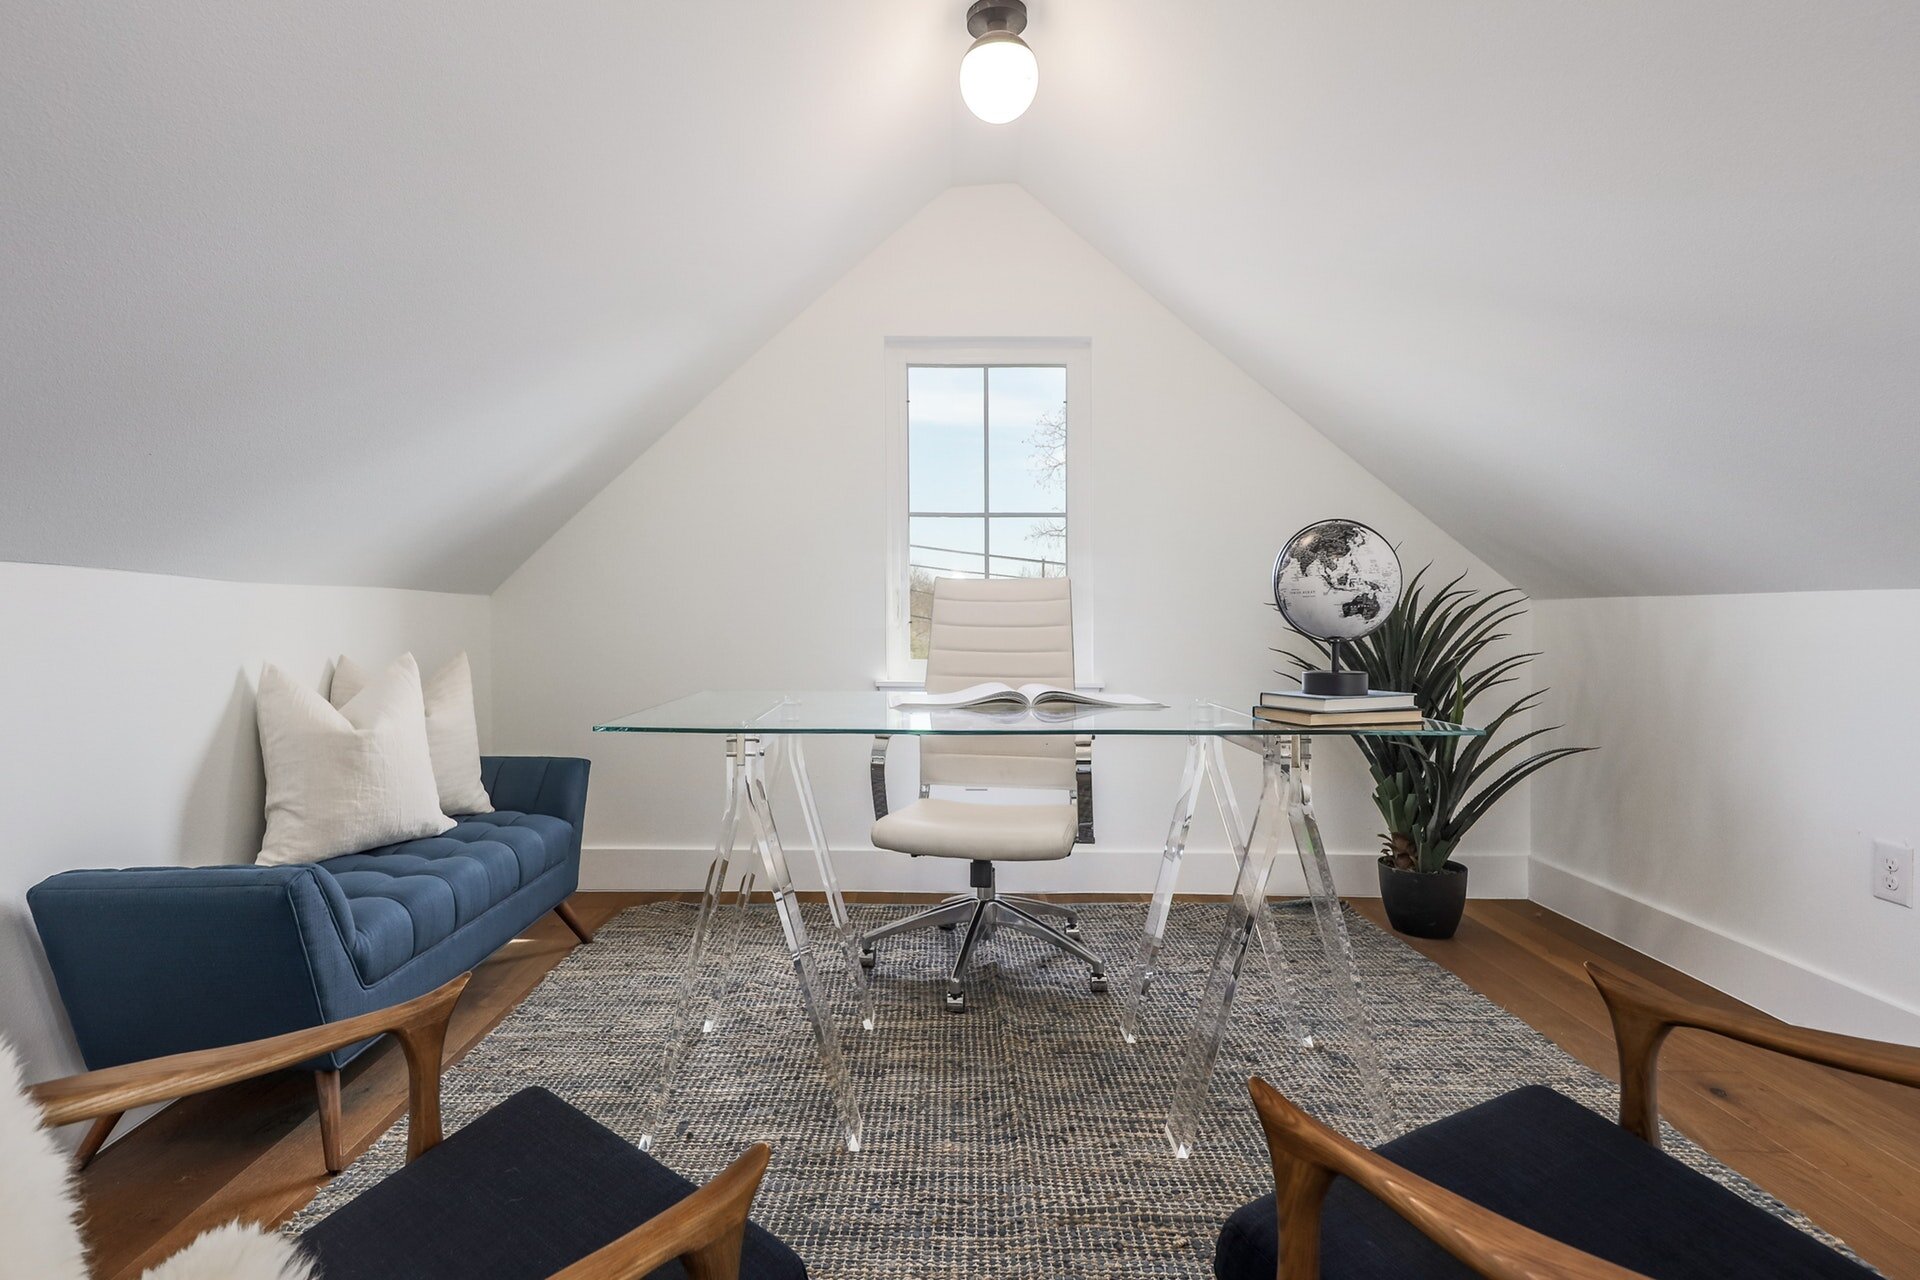 Office space with vaulted ceilings